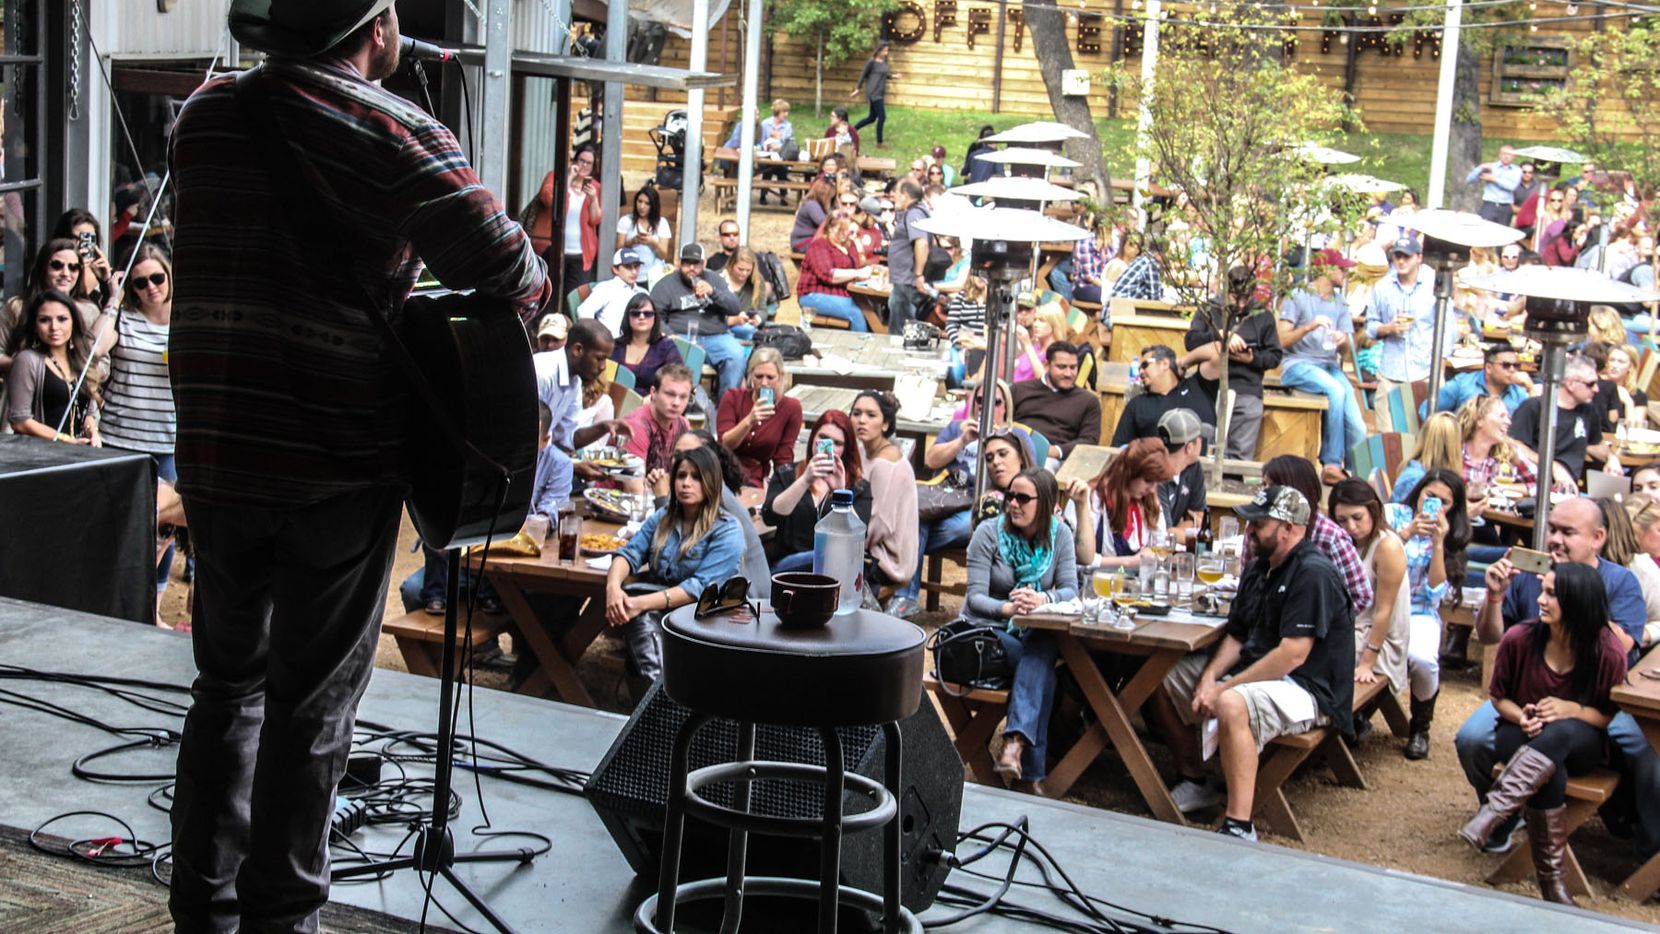 The definitive list: Dallas’ best patios for drinking, eating and relaxing